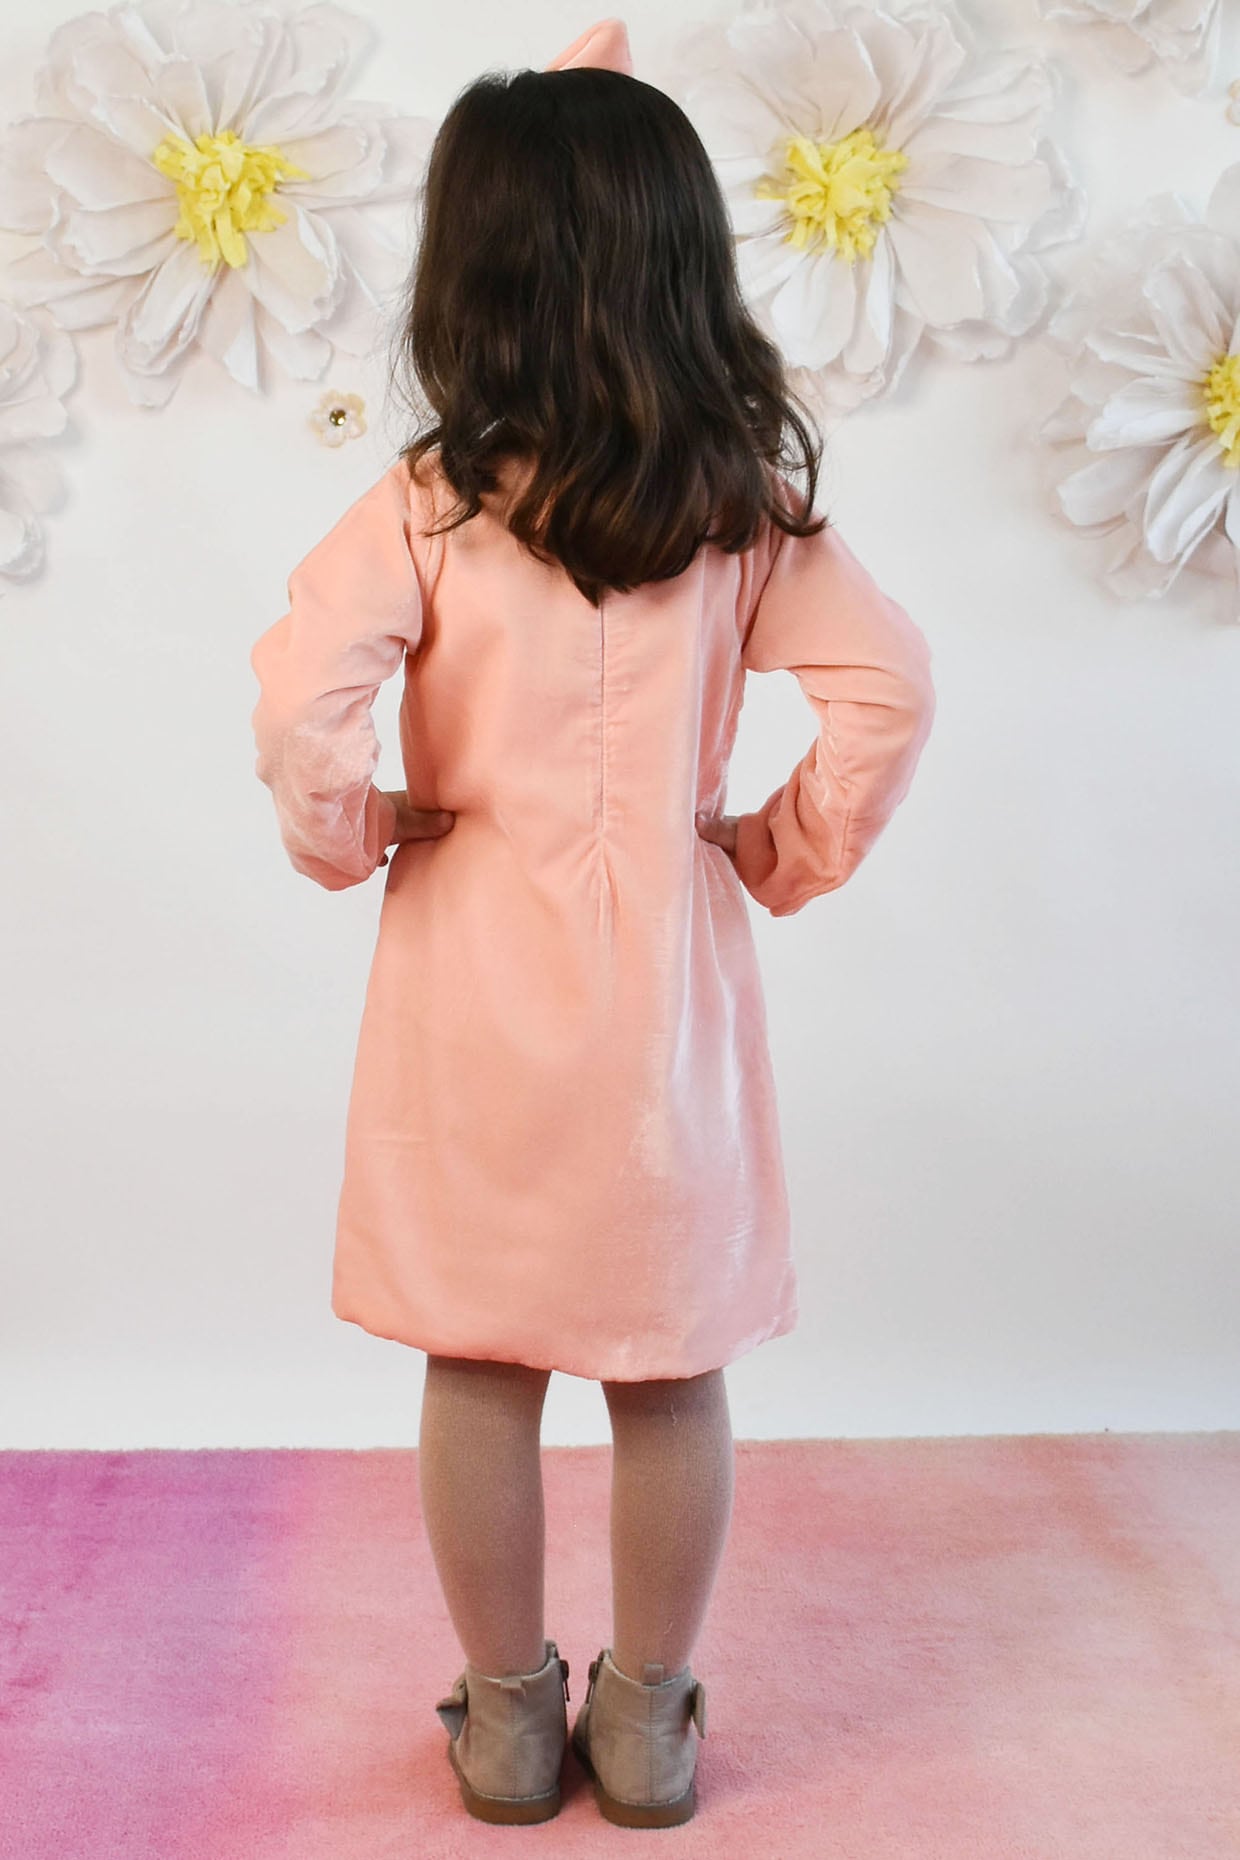 Shop Janie and Jack Baby Girl's Tiered Velvet Dress | Saks Fifth Avenue